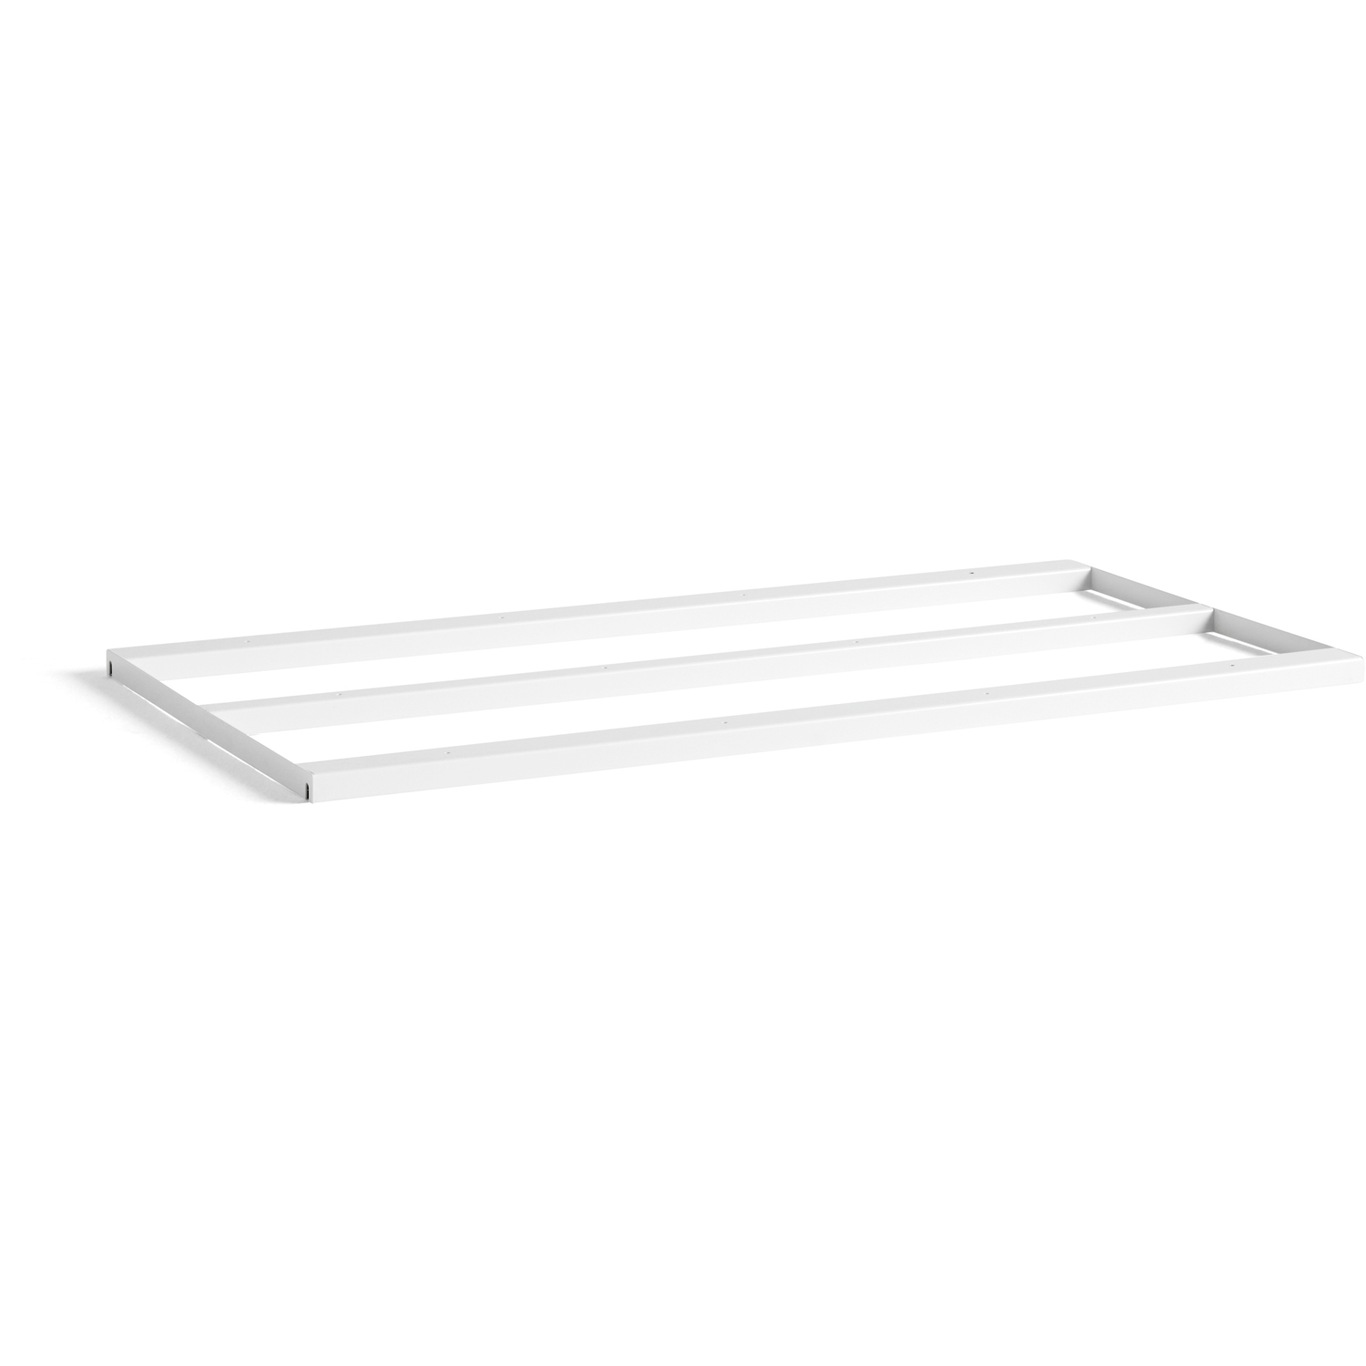 Loop Stand Support 180/200, White